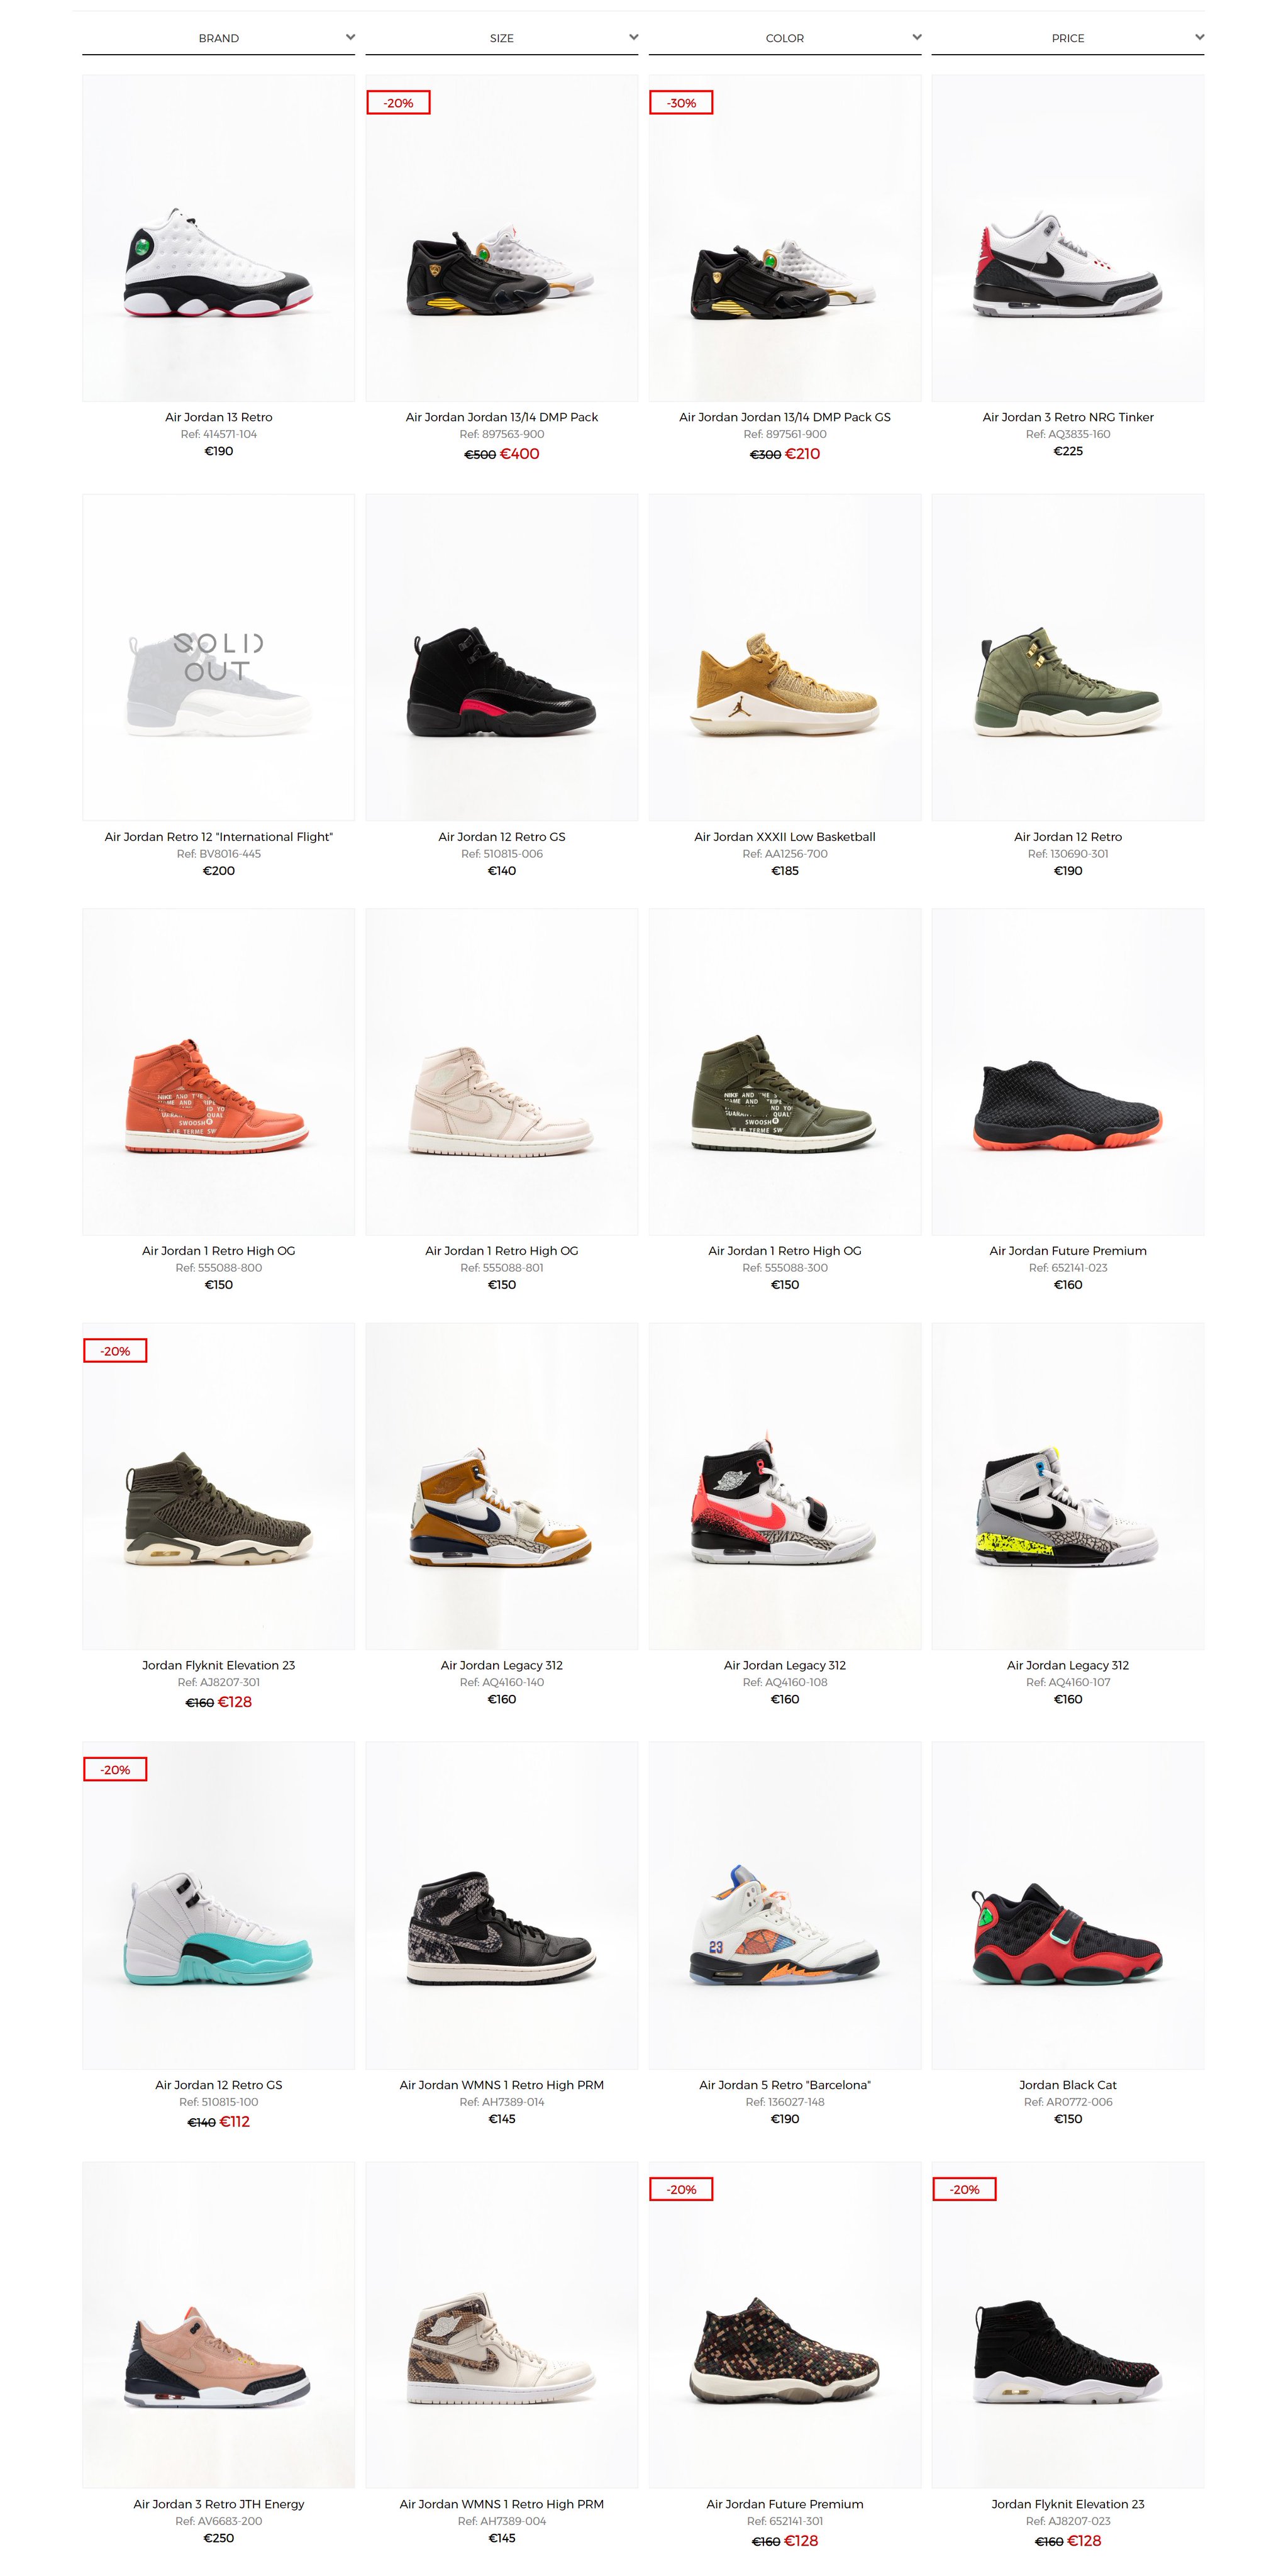 MoreSneakers.com on Twitter: "Get 20% OFF on many Air Jordan styles now on  @FootDistrict No code needed, discount at checkout  =&gt;https://t.co/VZfp7QQQyY https://t.co/9LHU6GUkoc" / Twitter